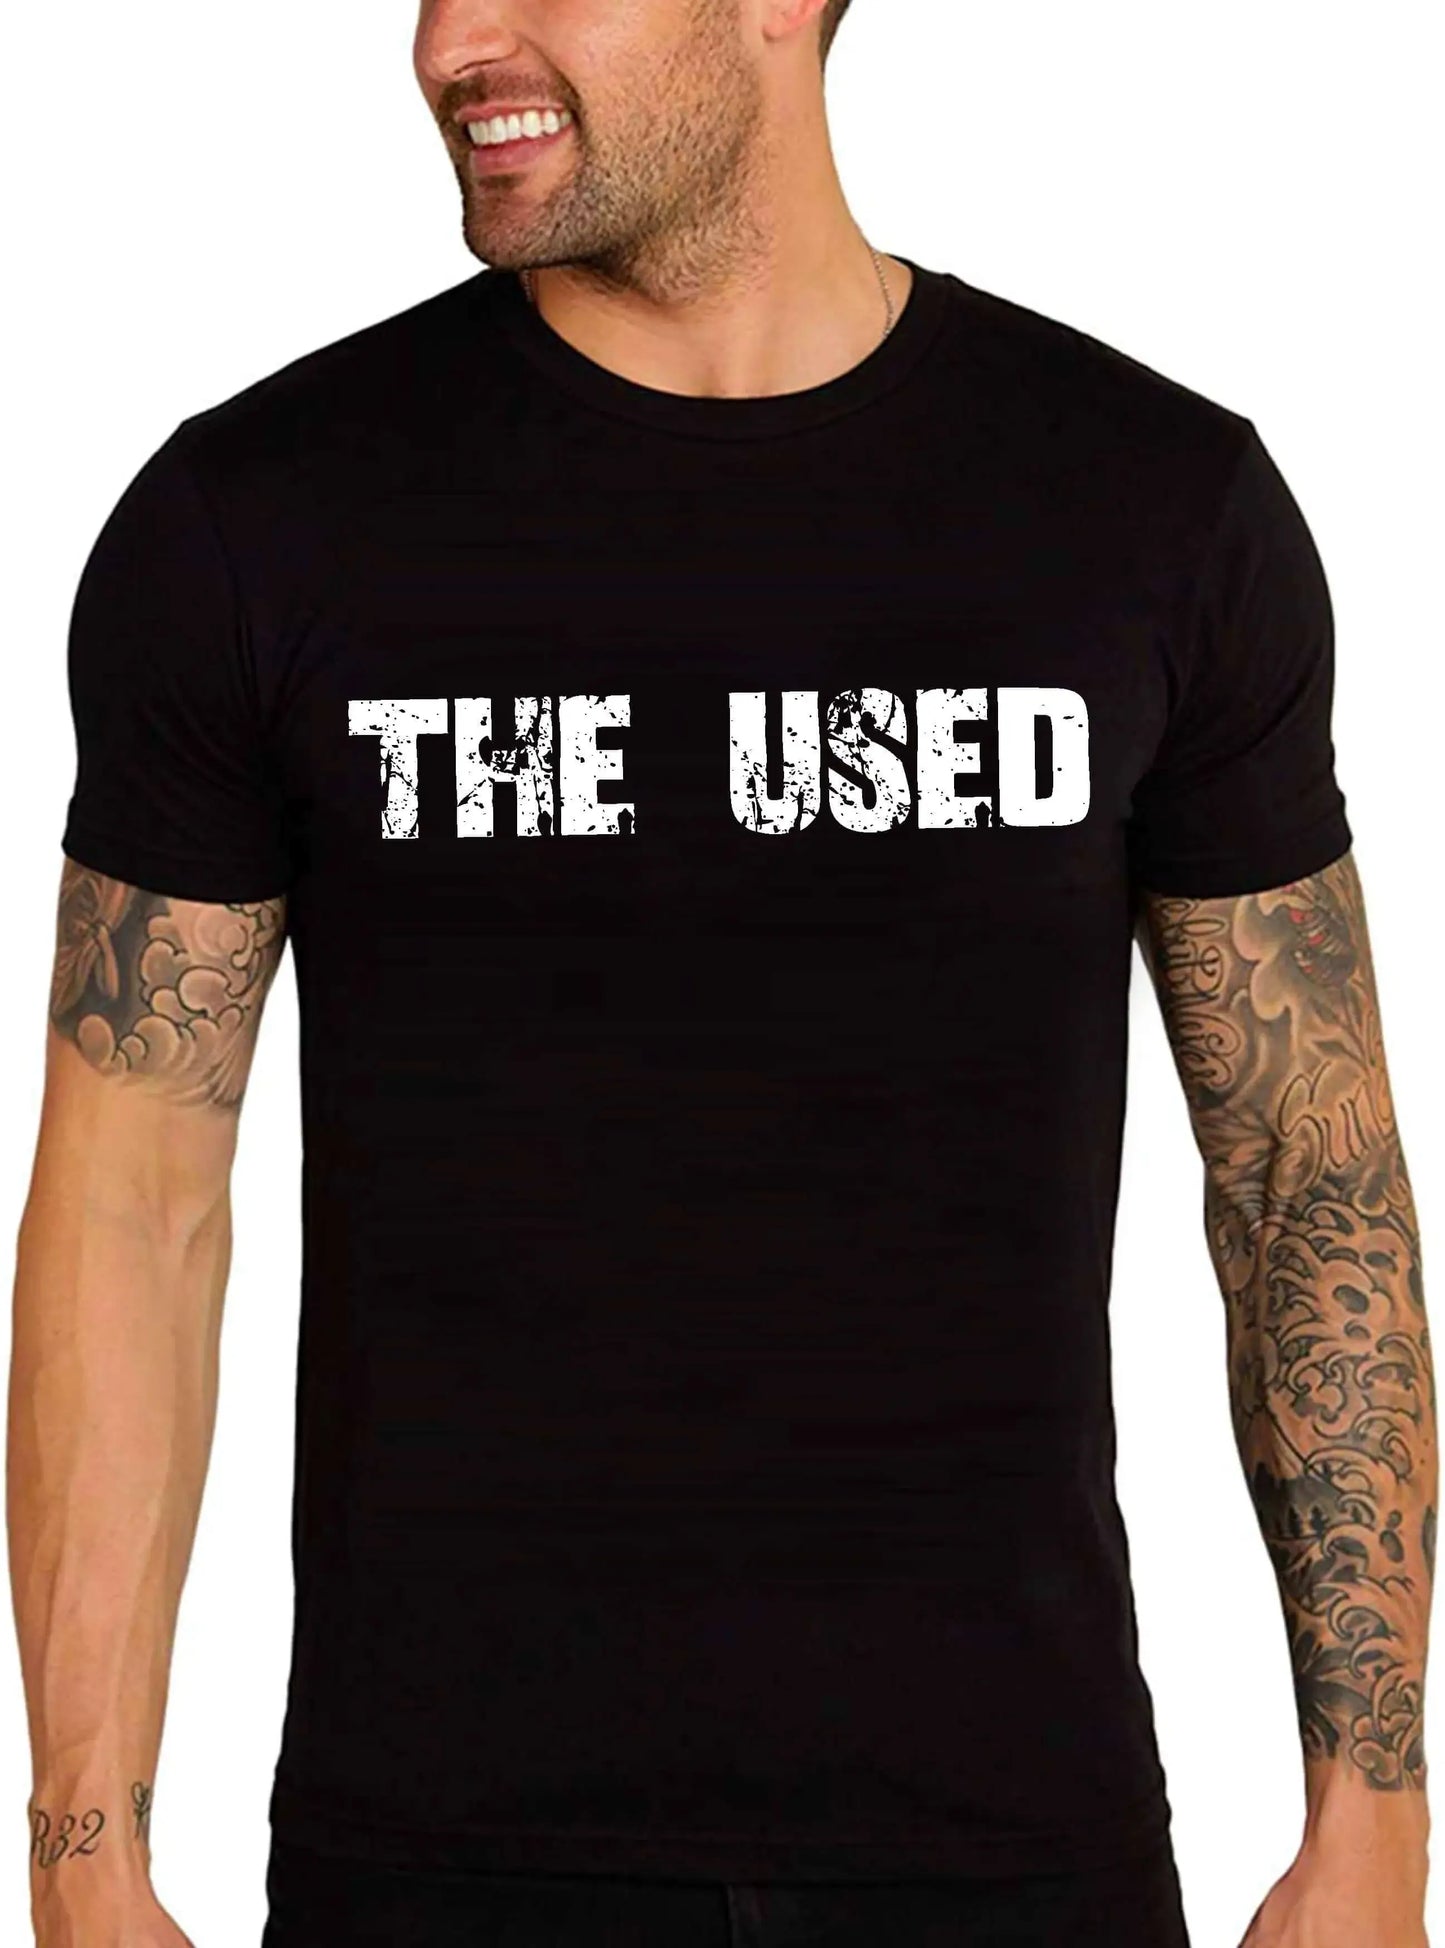 Men's Graphic T-Shirt The Used Eco-Friendly Limited Edition Short Sleeve Tee-Shirt Vintage Birthday Gift Novelty